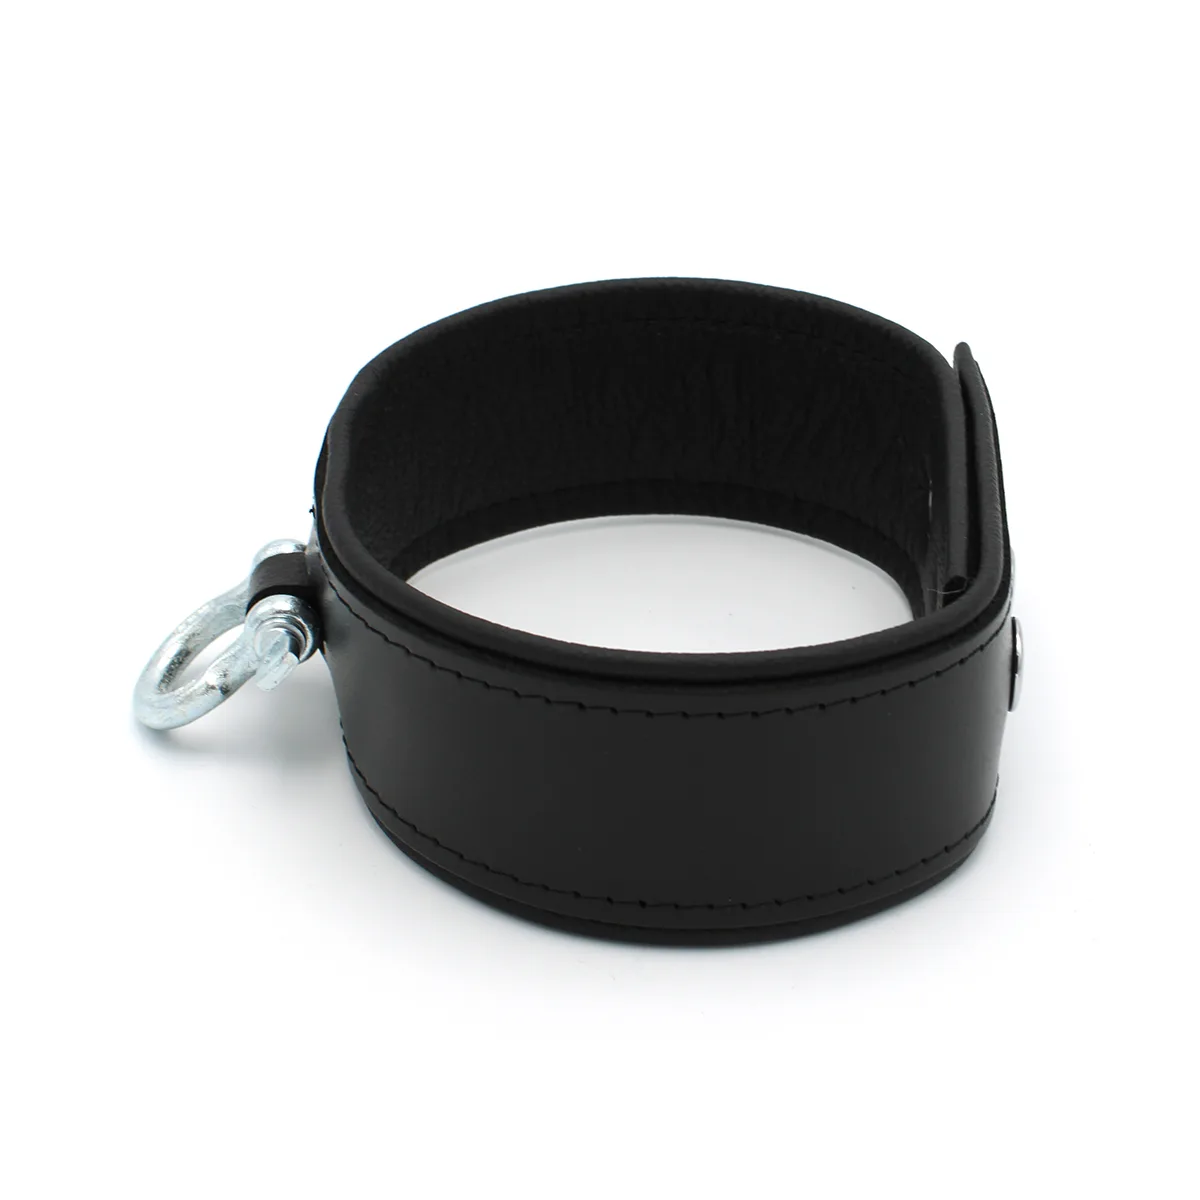 Leather-Push-Button-Collar-with-Metal-Shackle-134-KIO-0373-3